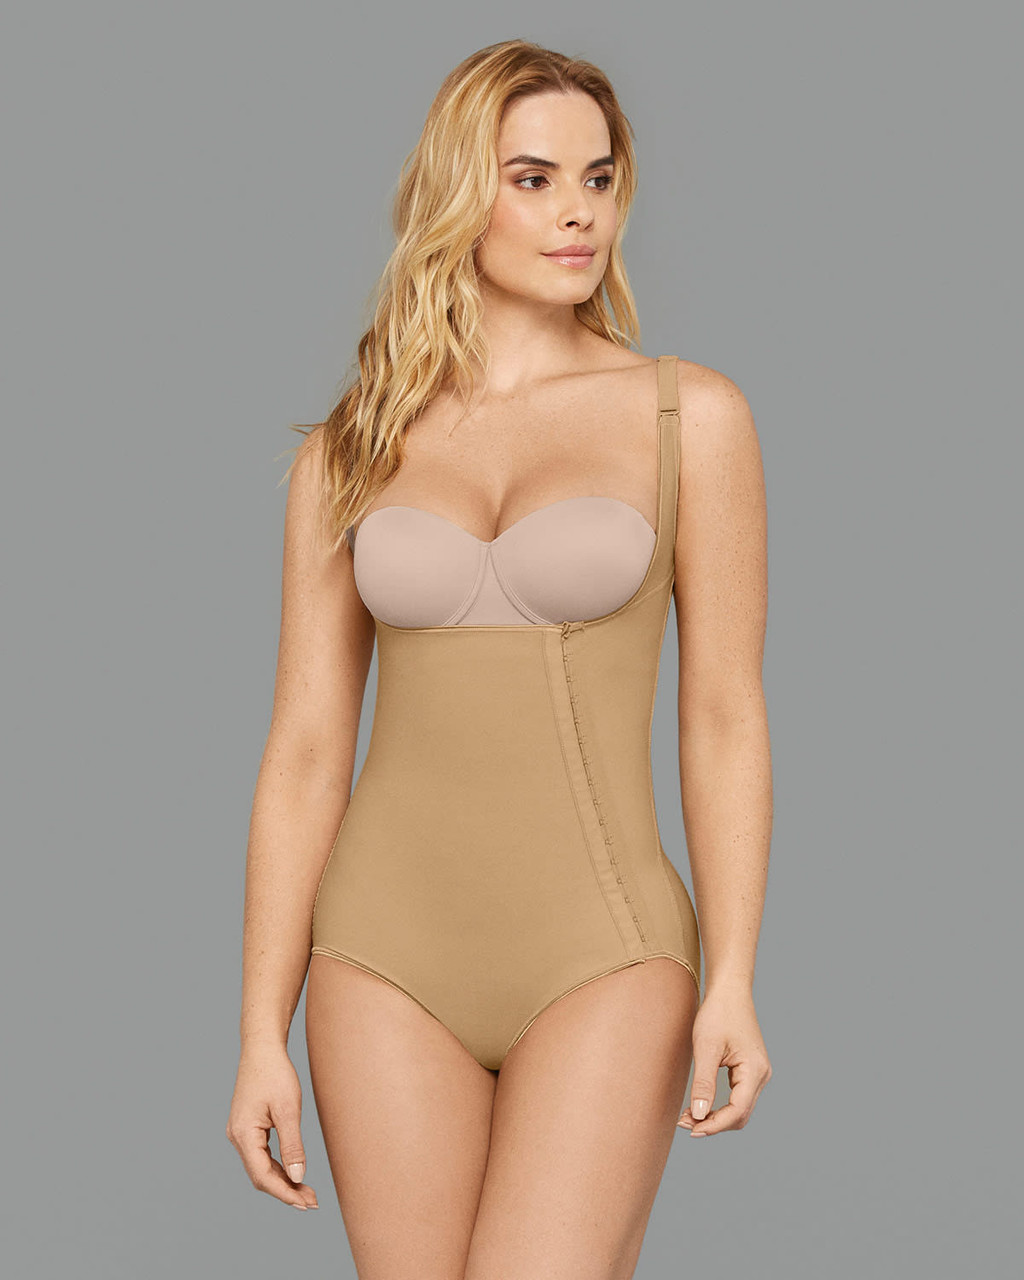 Leonisa Double Take Open Bust Firm Compression Post-Surgical Body Shaper S